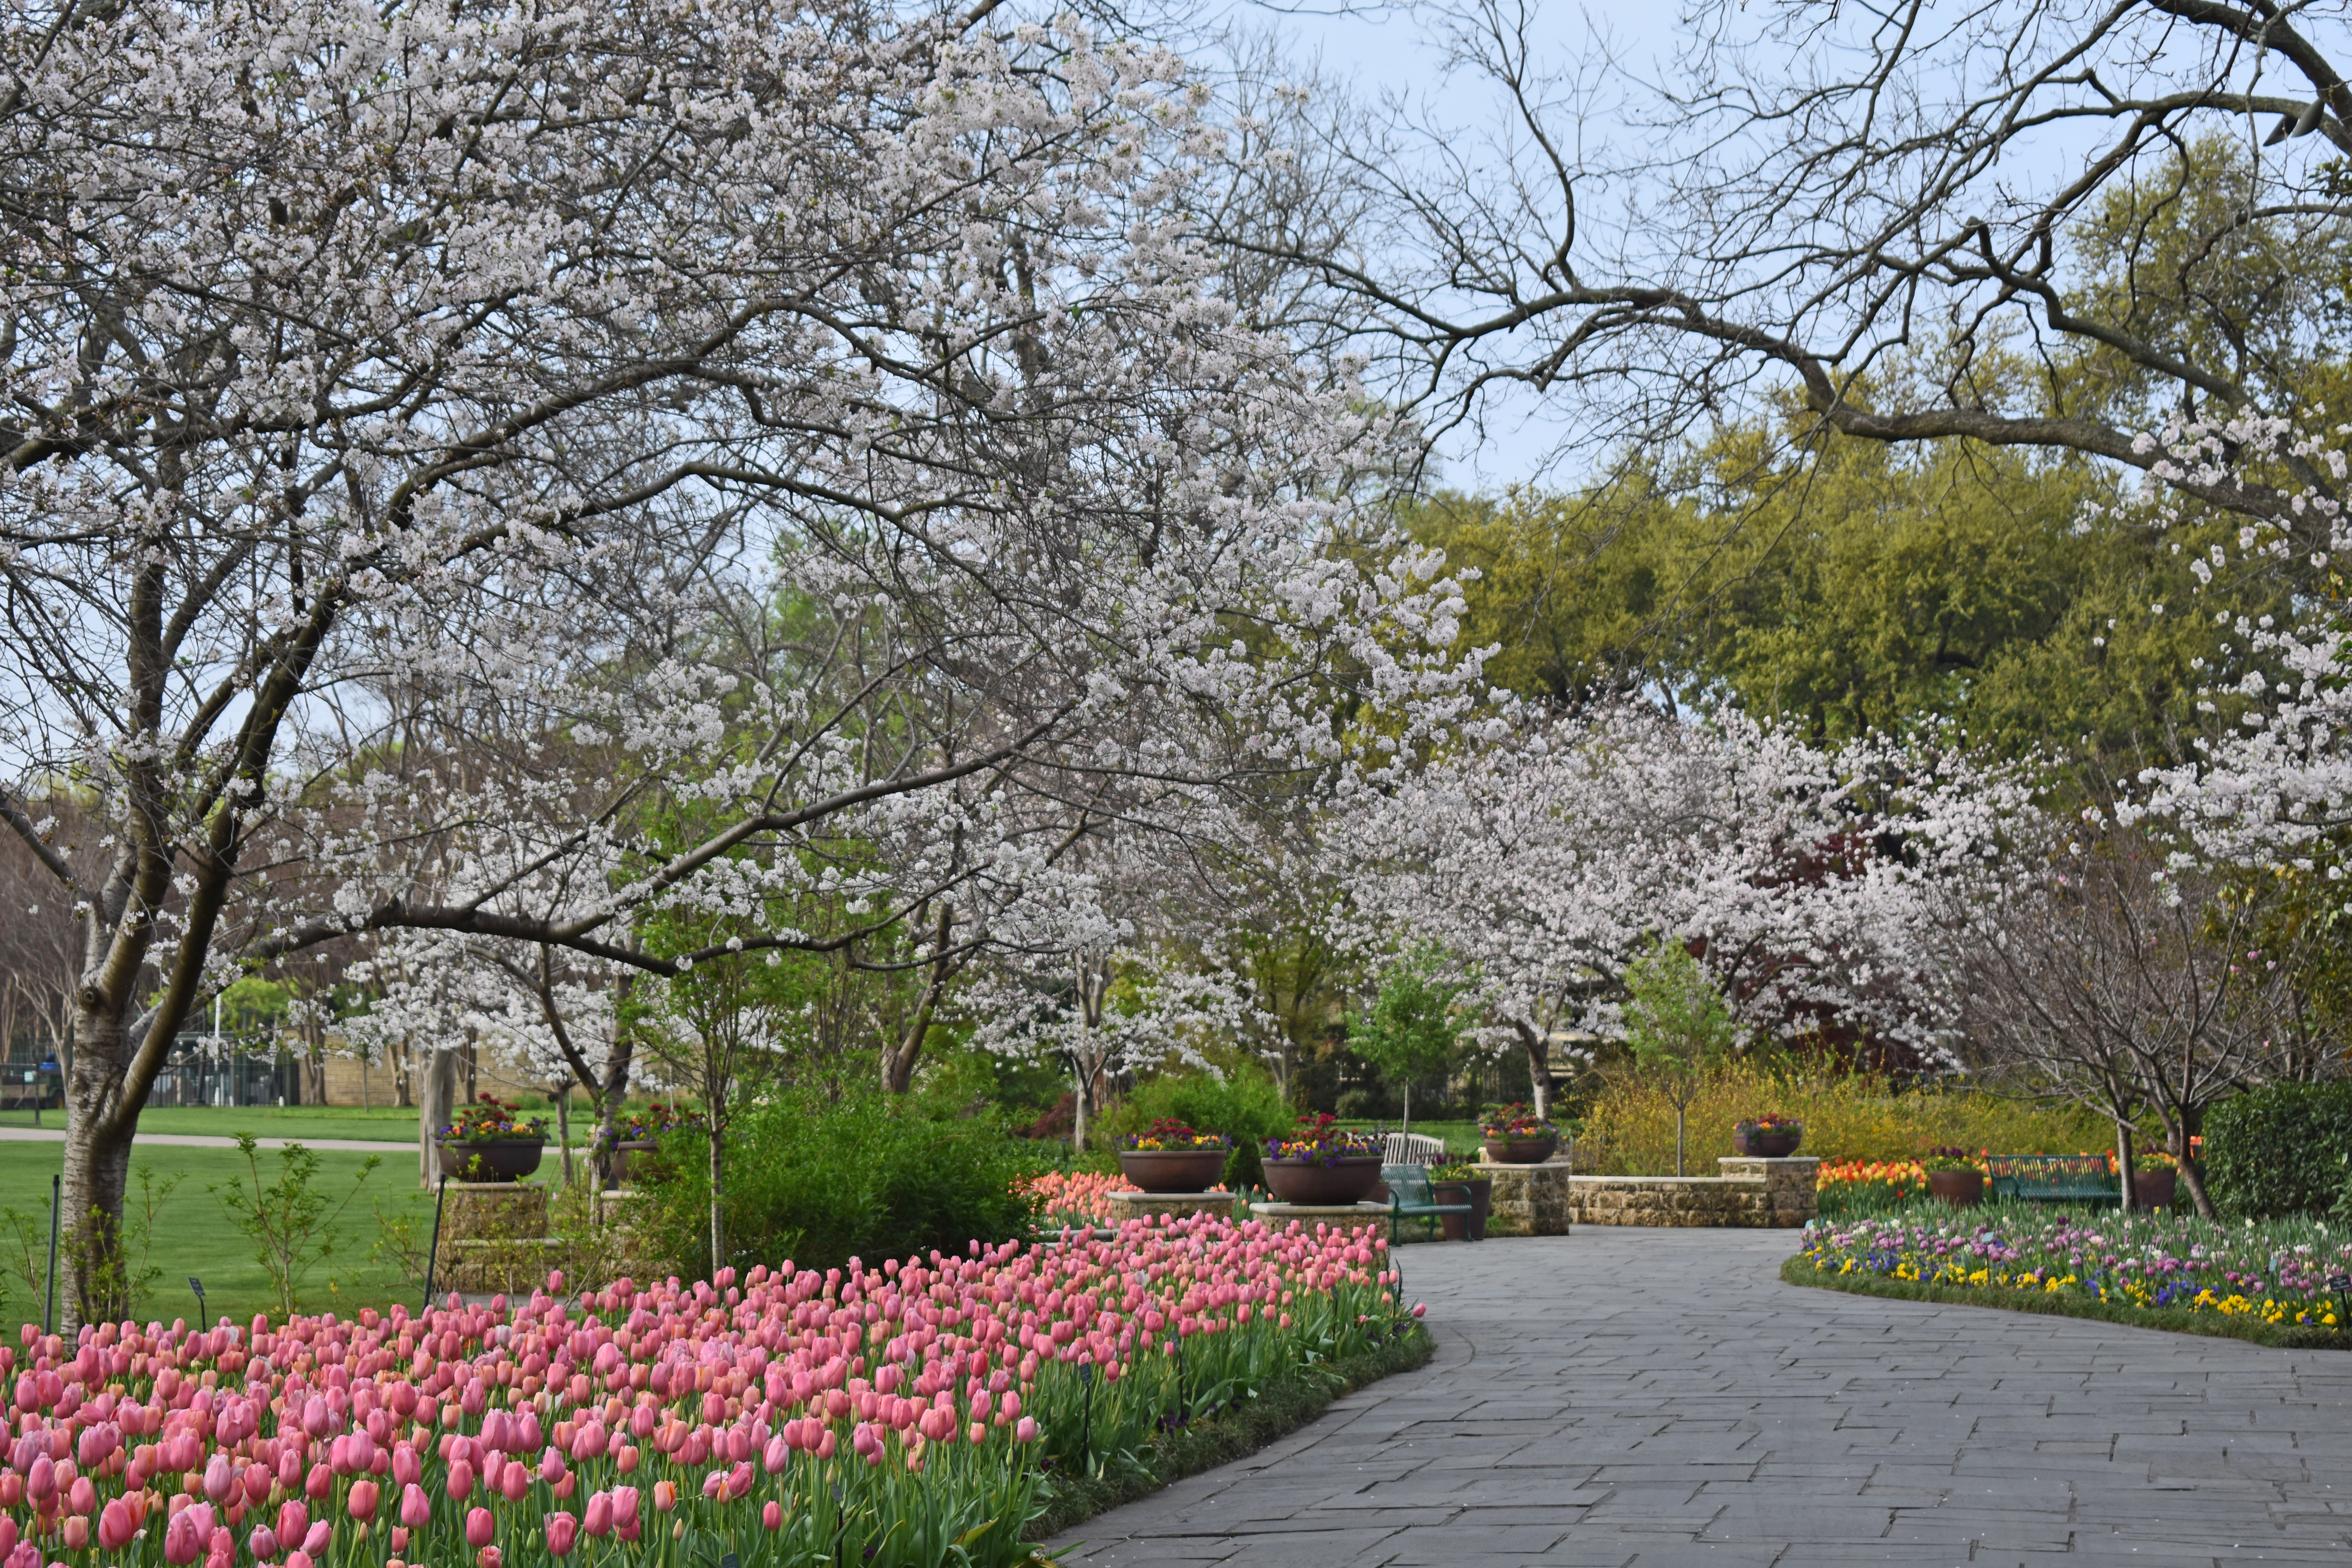 150 Japanese cherry trees to join 350,000 blooming tulips at Dallas
Blooms